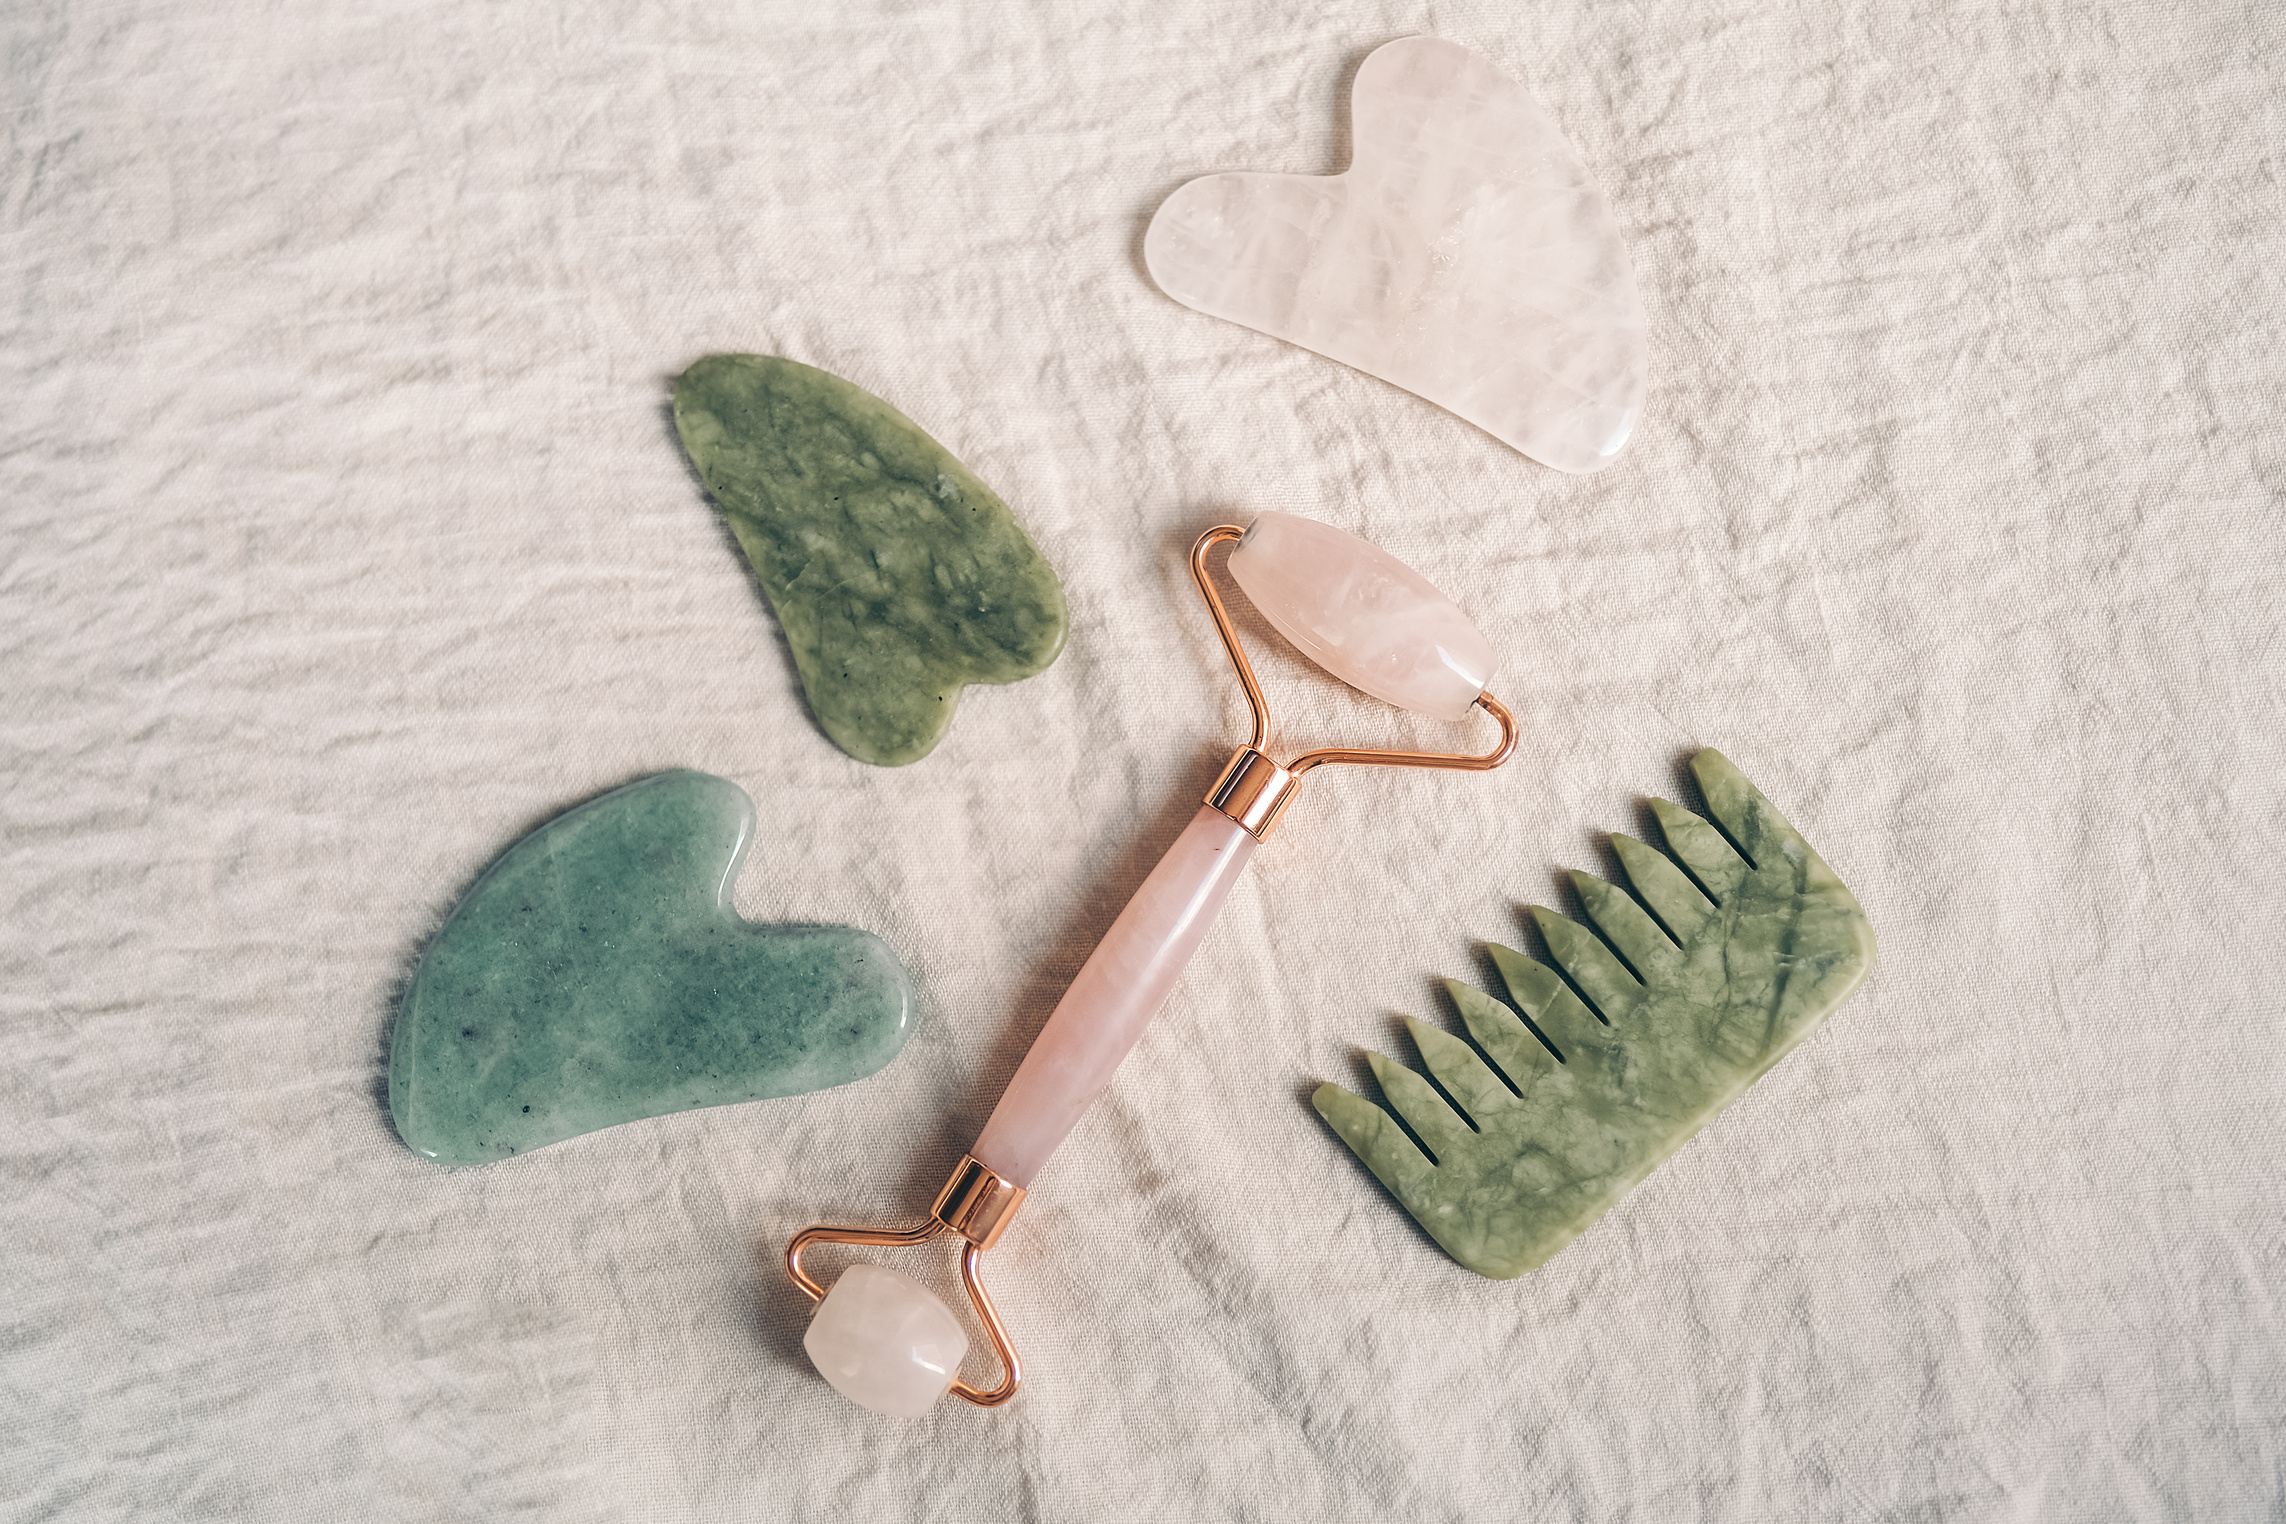 Natural Stone Gua Sha Tools for Facial Acupuncture Massage